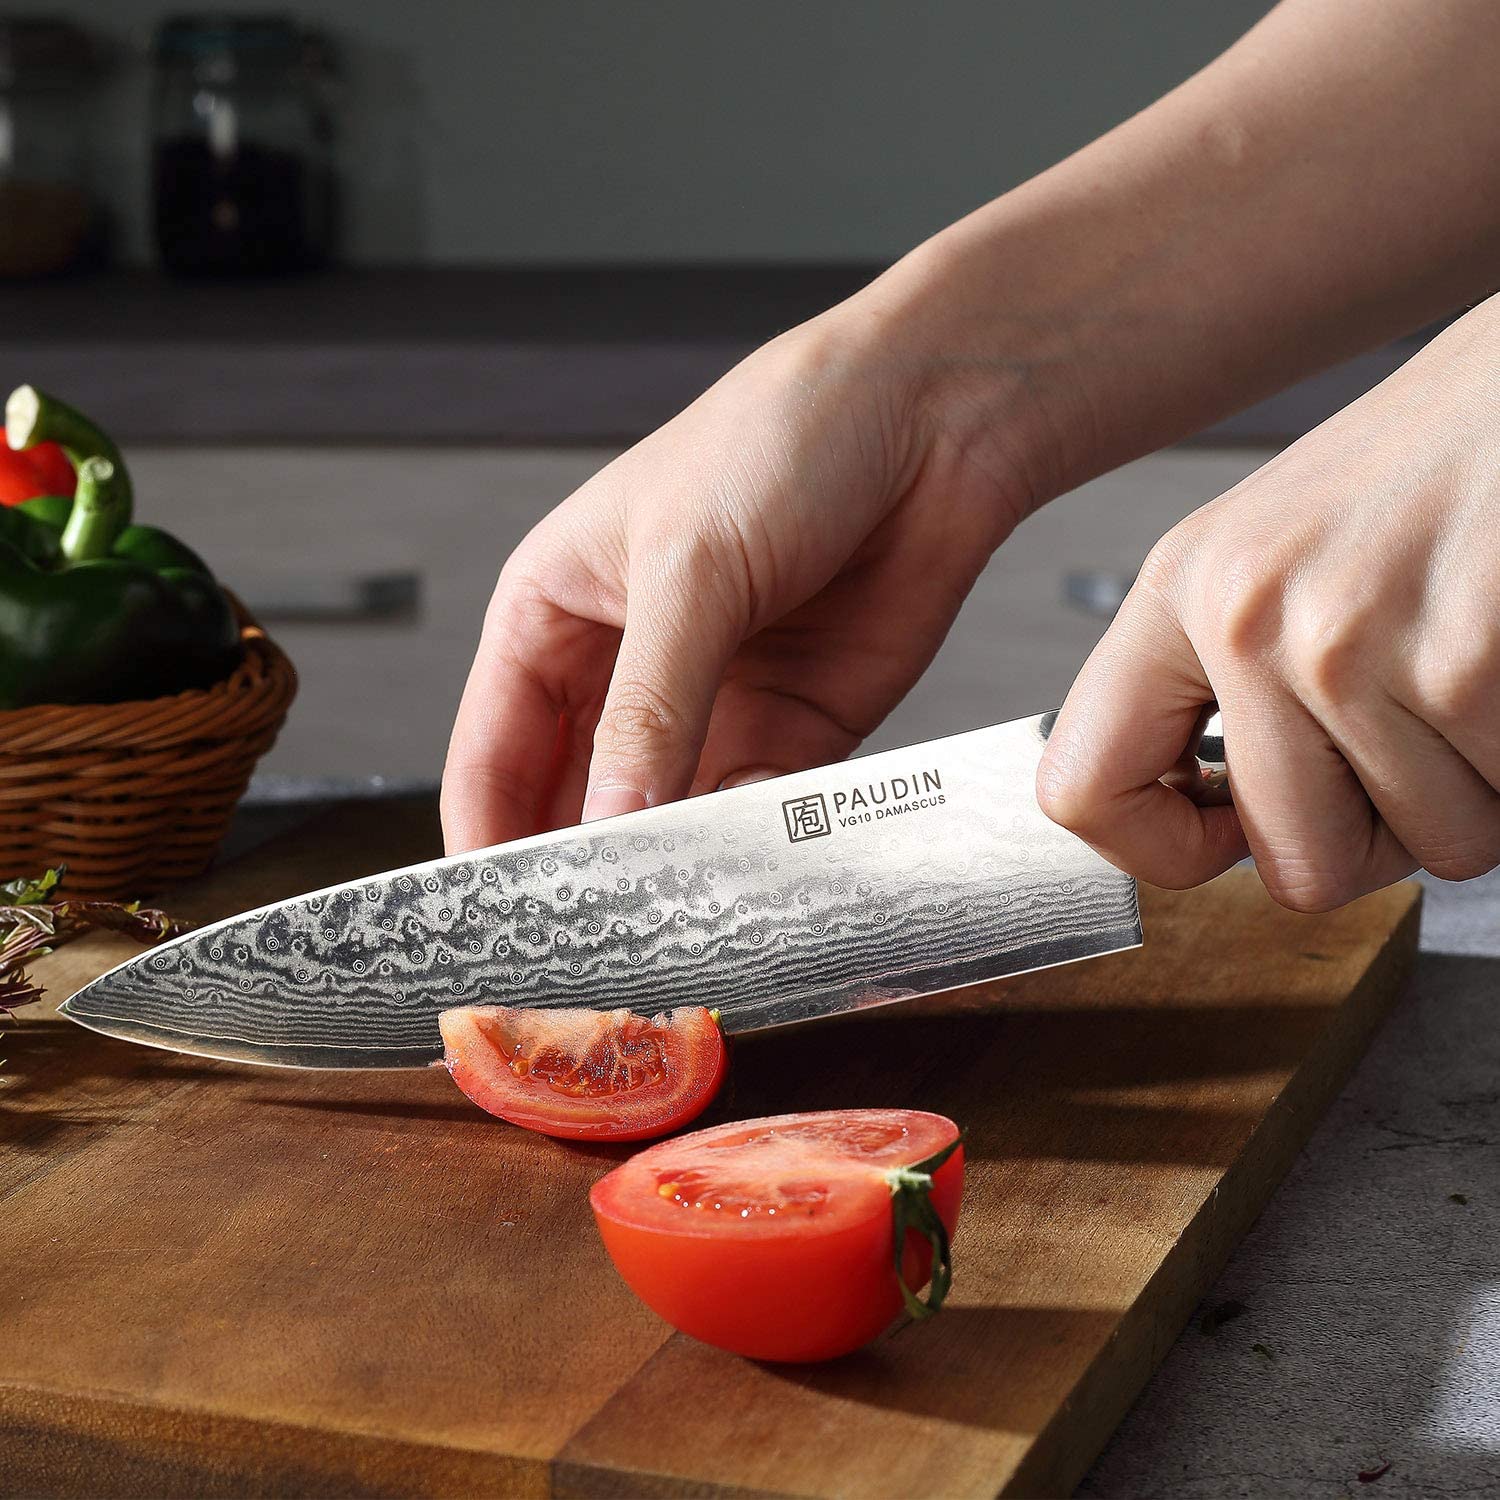 5 Best Paudin Knives (Reviews Updated 2021)